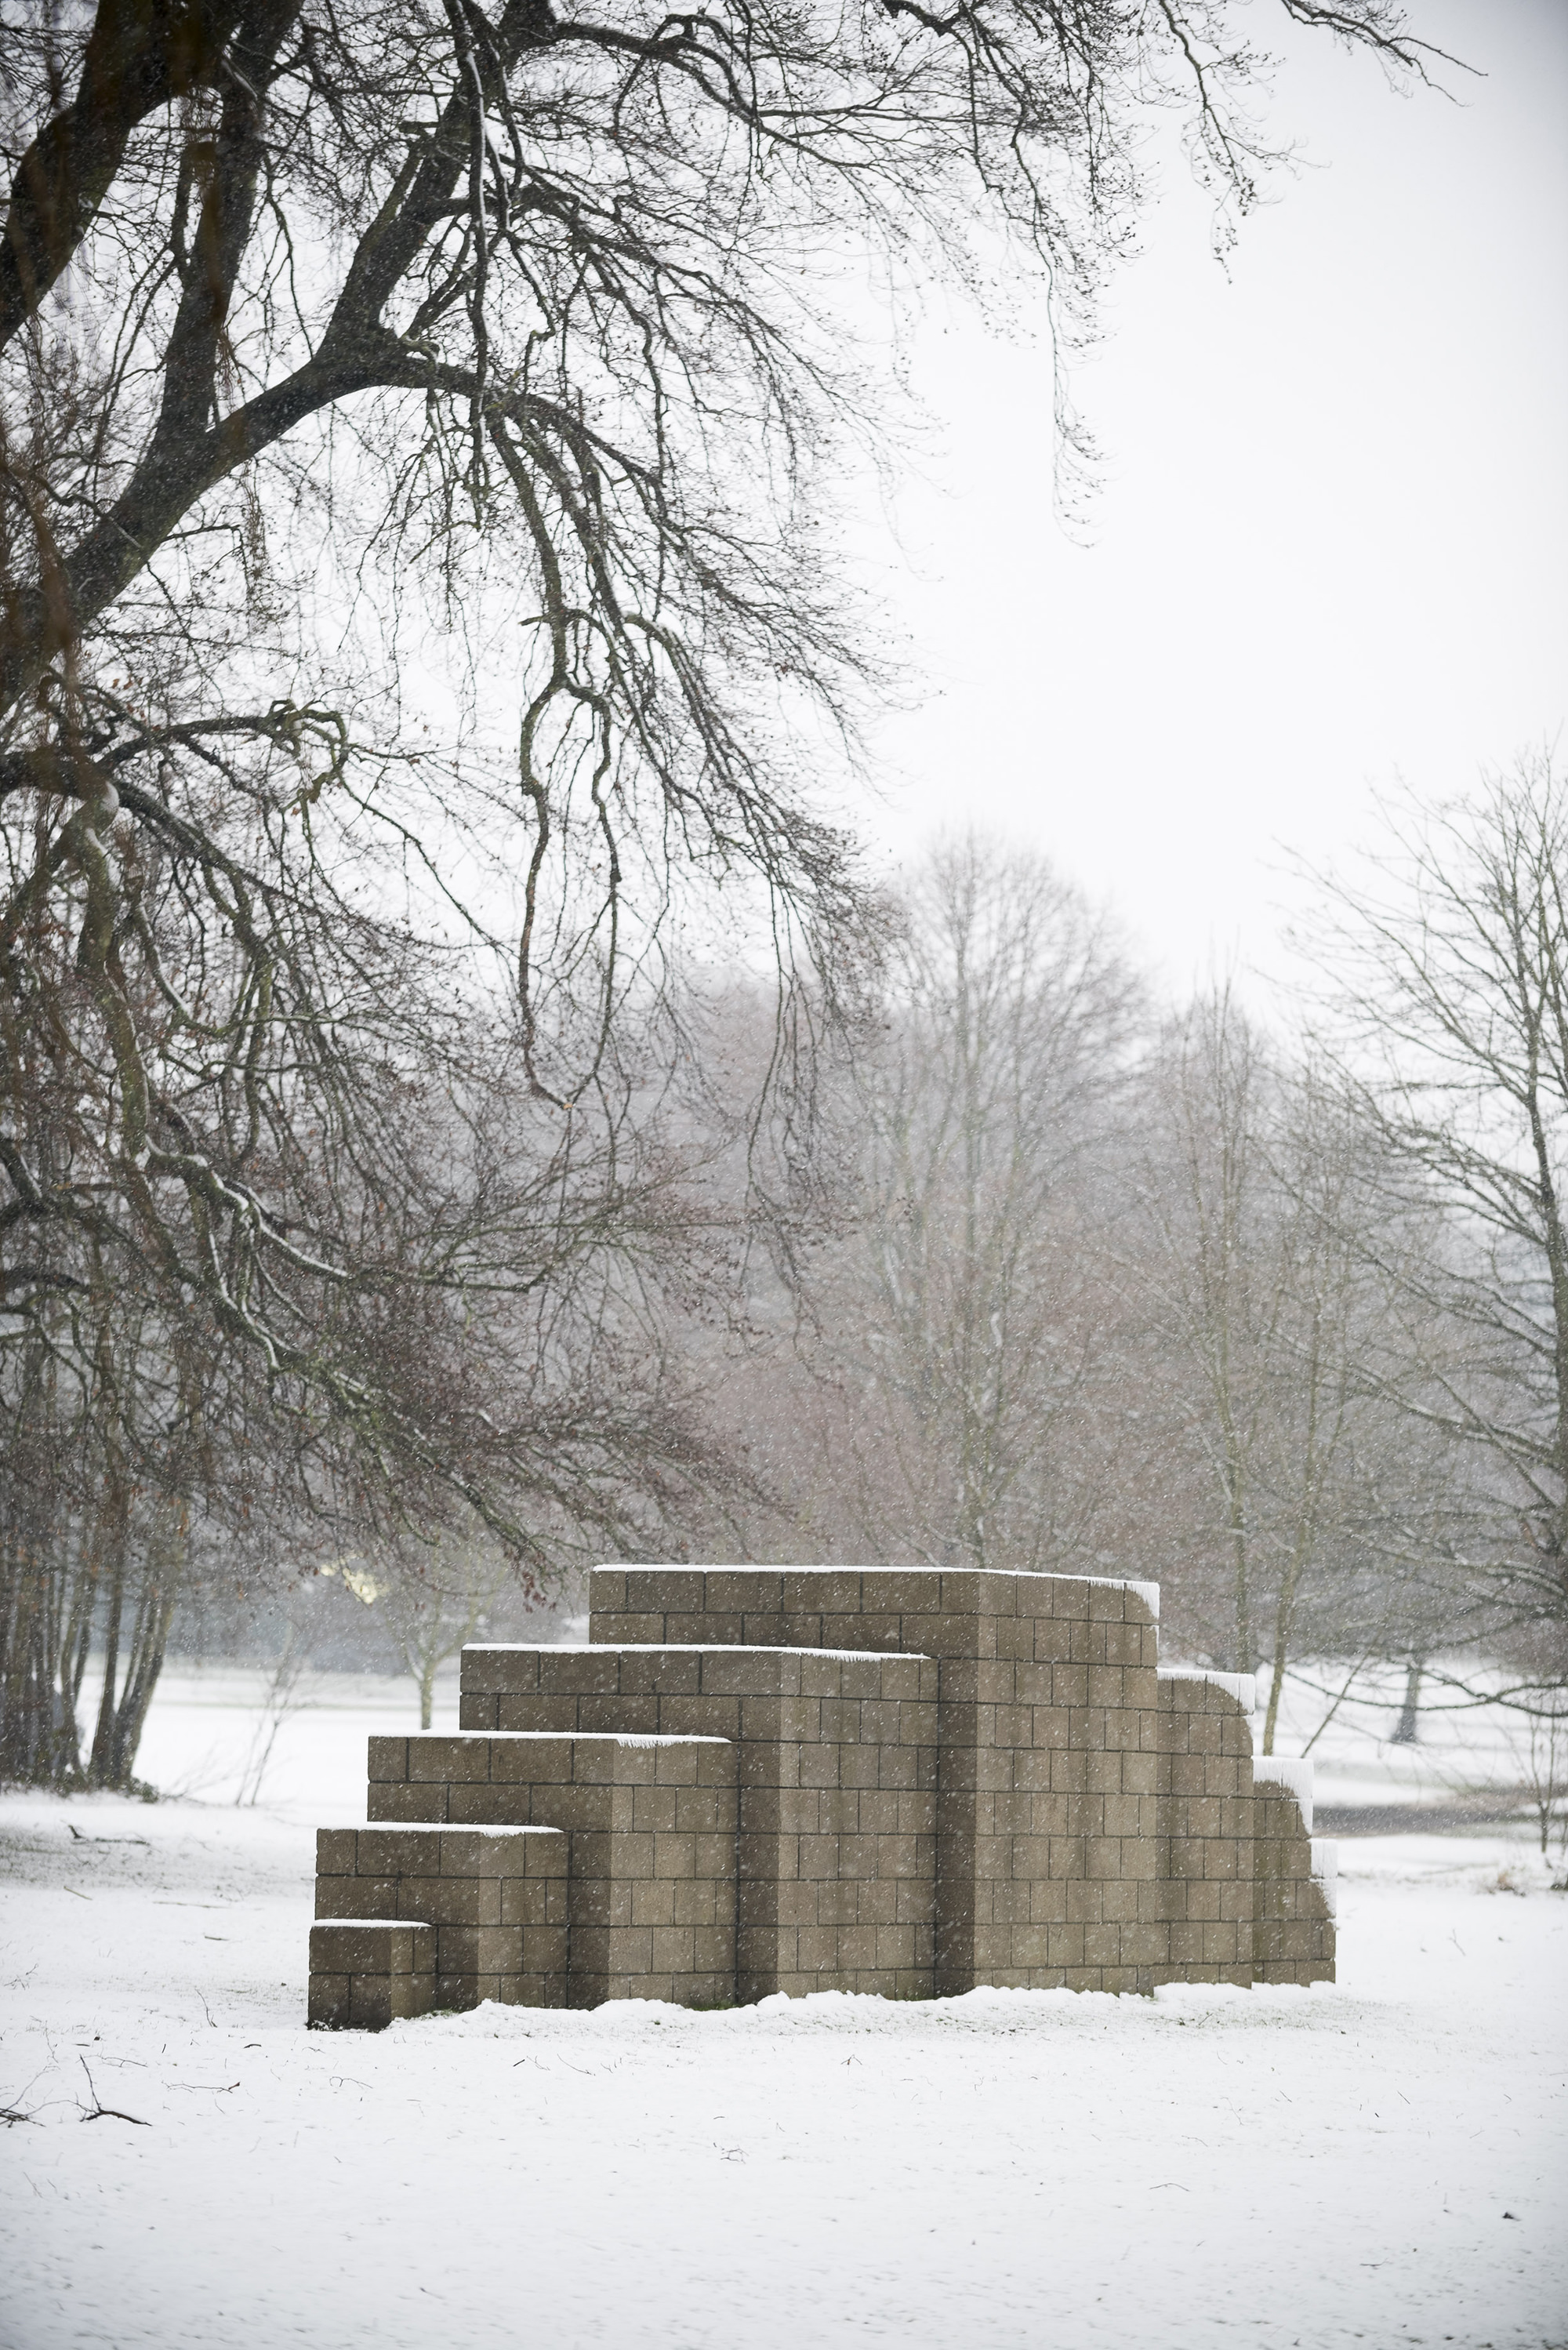 Sol Lewitt 123454321, 1993, in the snow at Yorkshire Sculpture Park